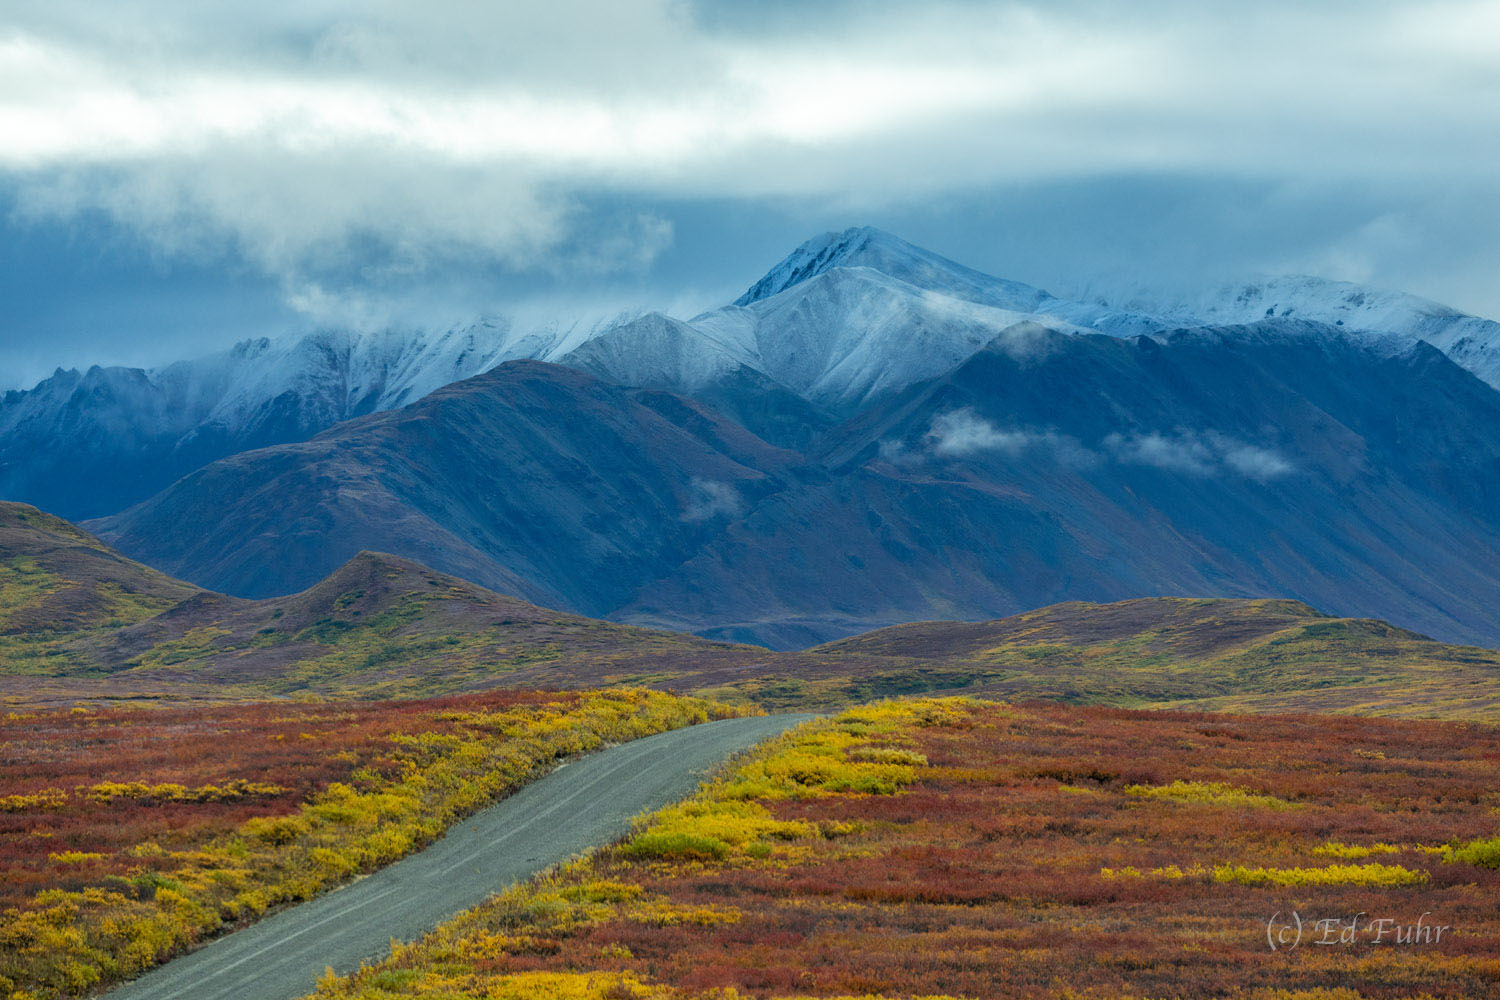 The 2021 landslide has brought an enduring quiet to the Denali Park road.